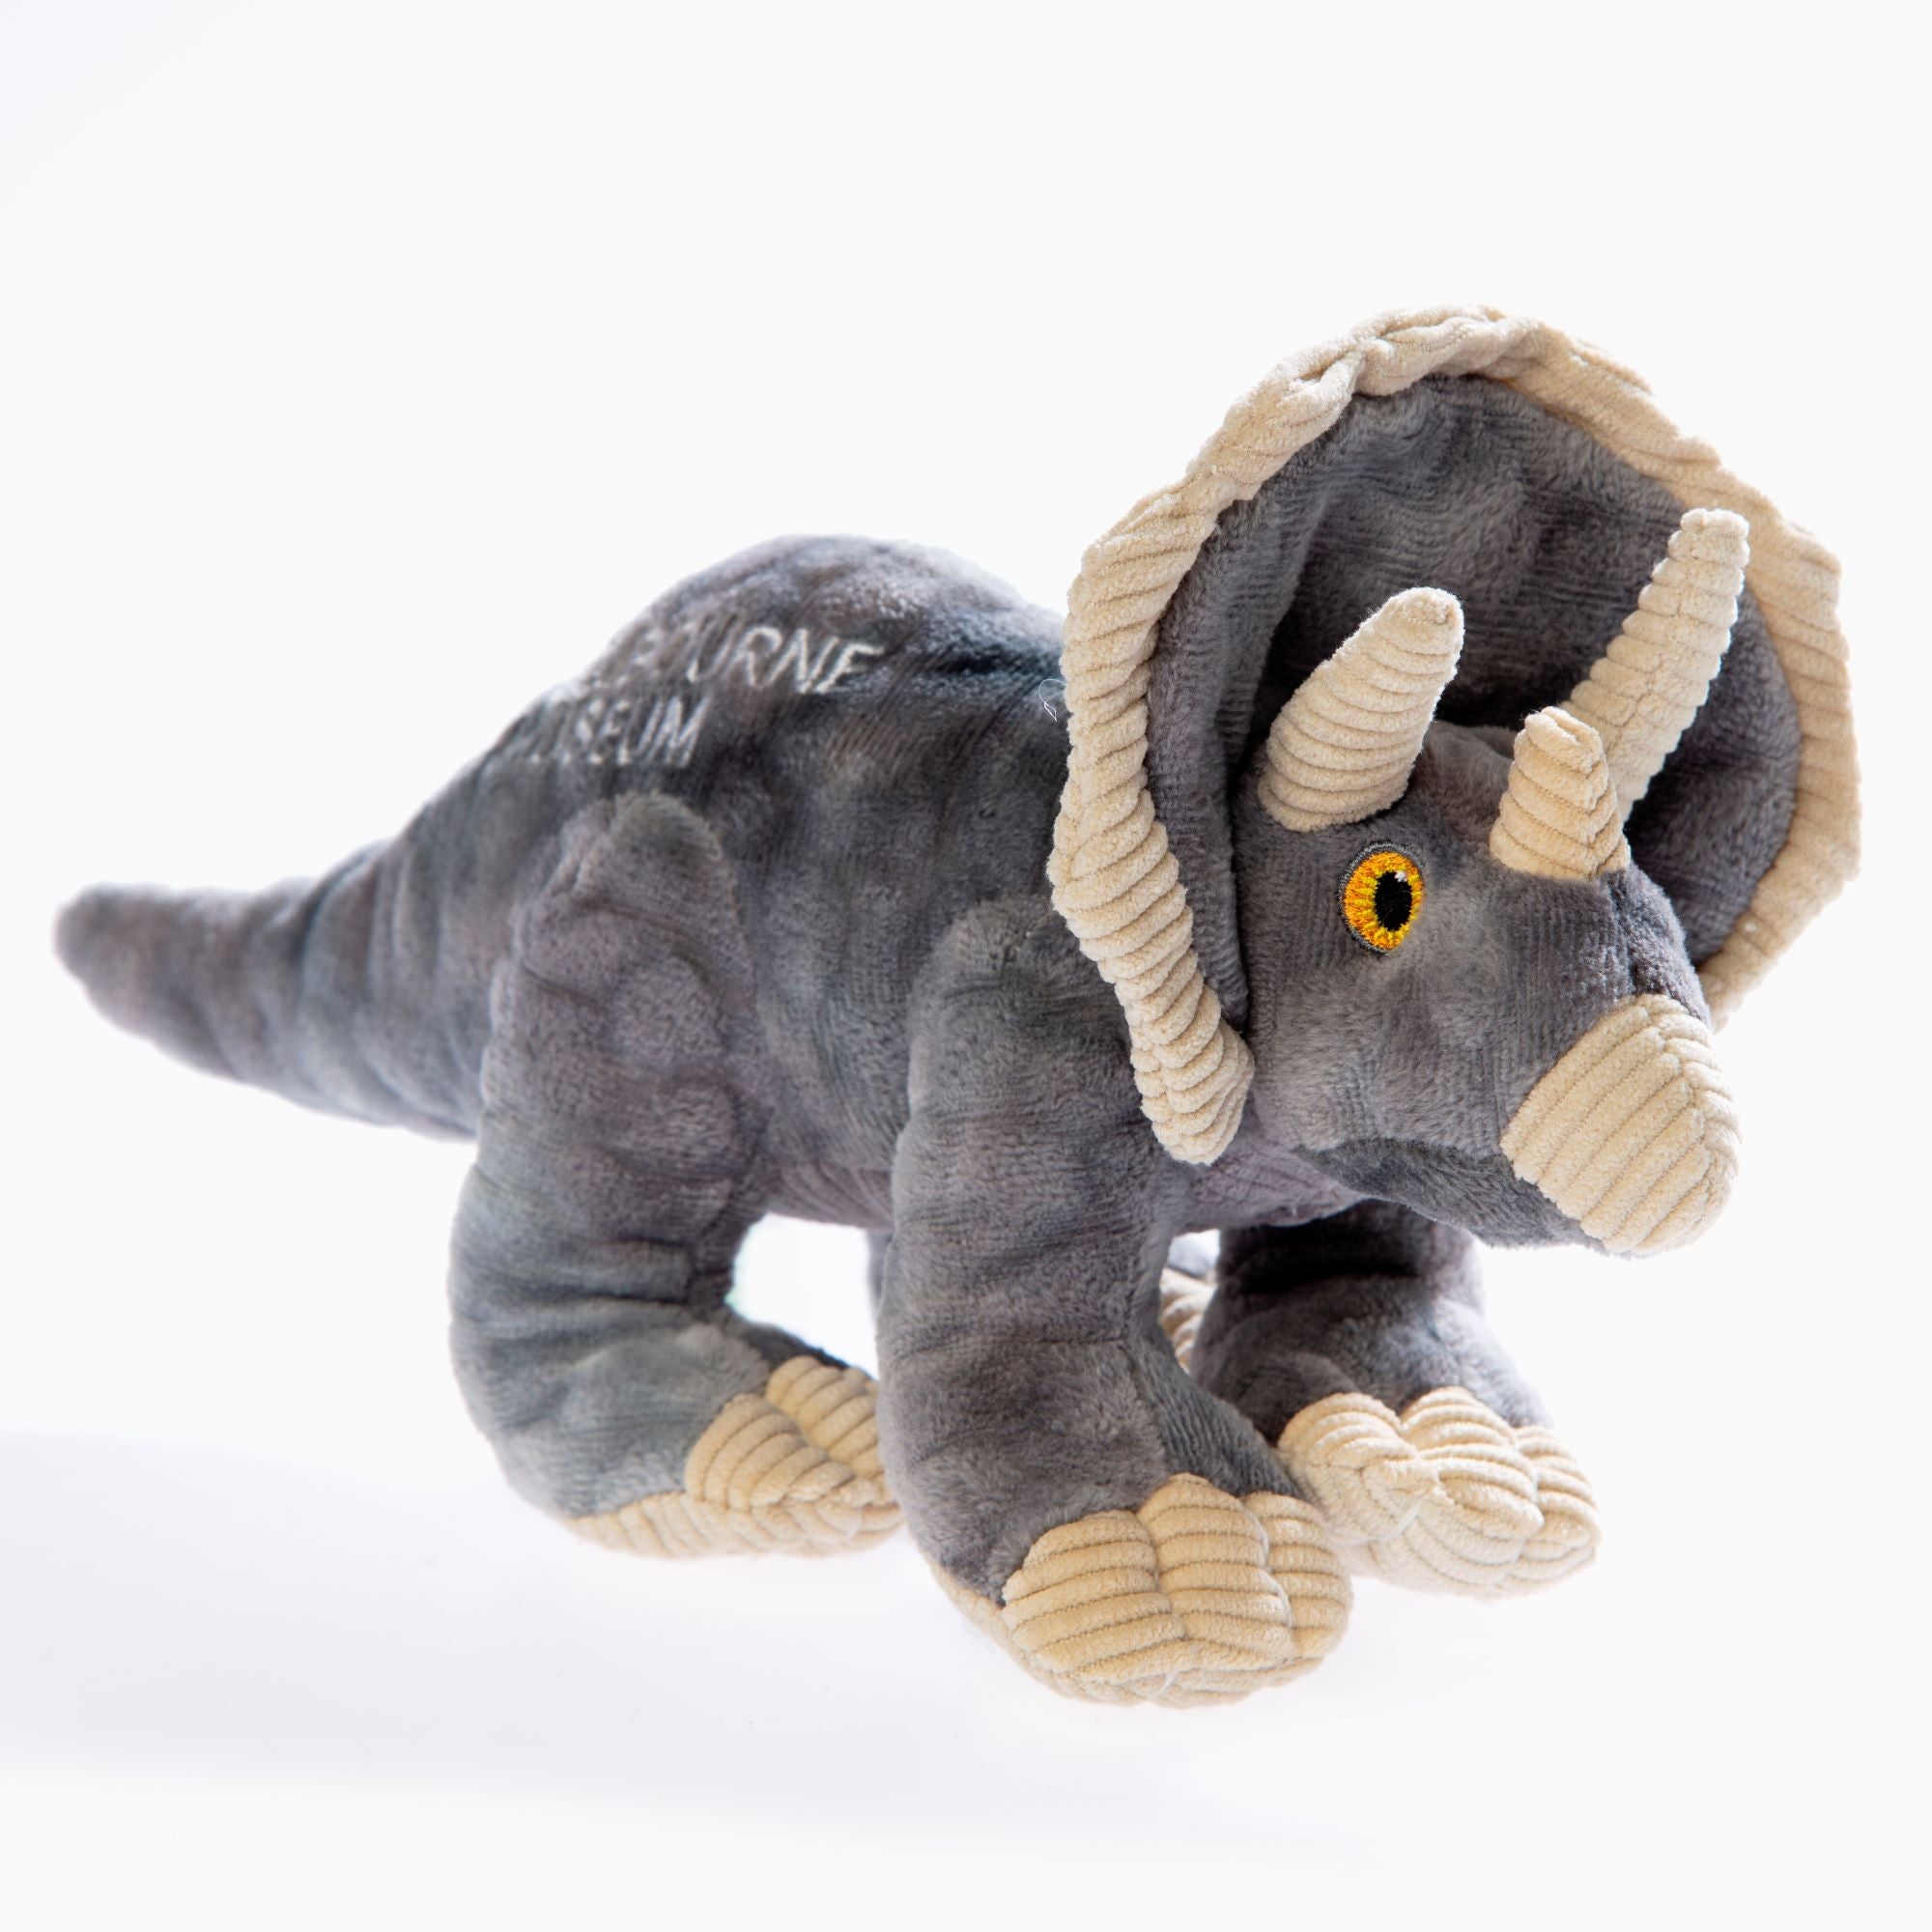 HD204527-A-PlushTriceratops-018-online.jpg